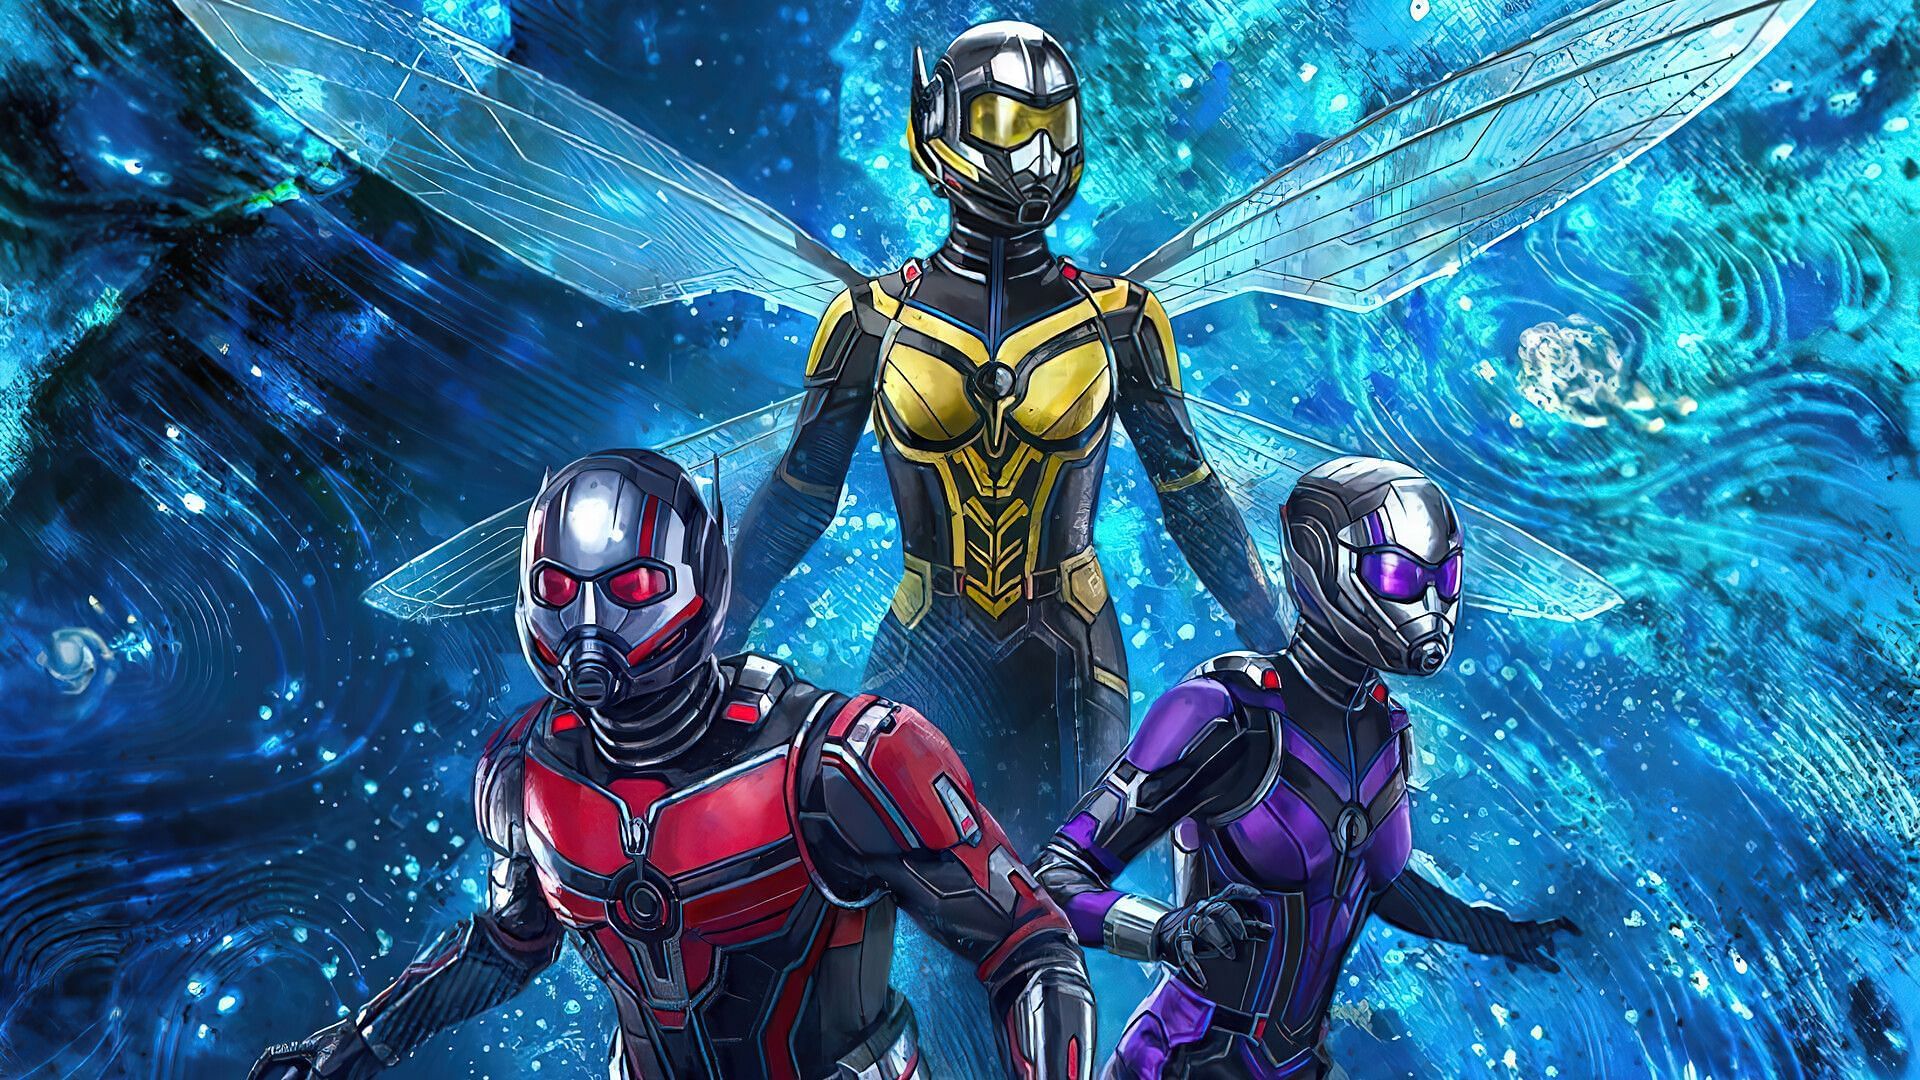 Promo art for Ant-Man and the Wasp: Quantumania (image via Marvel Studios)